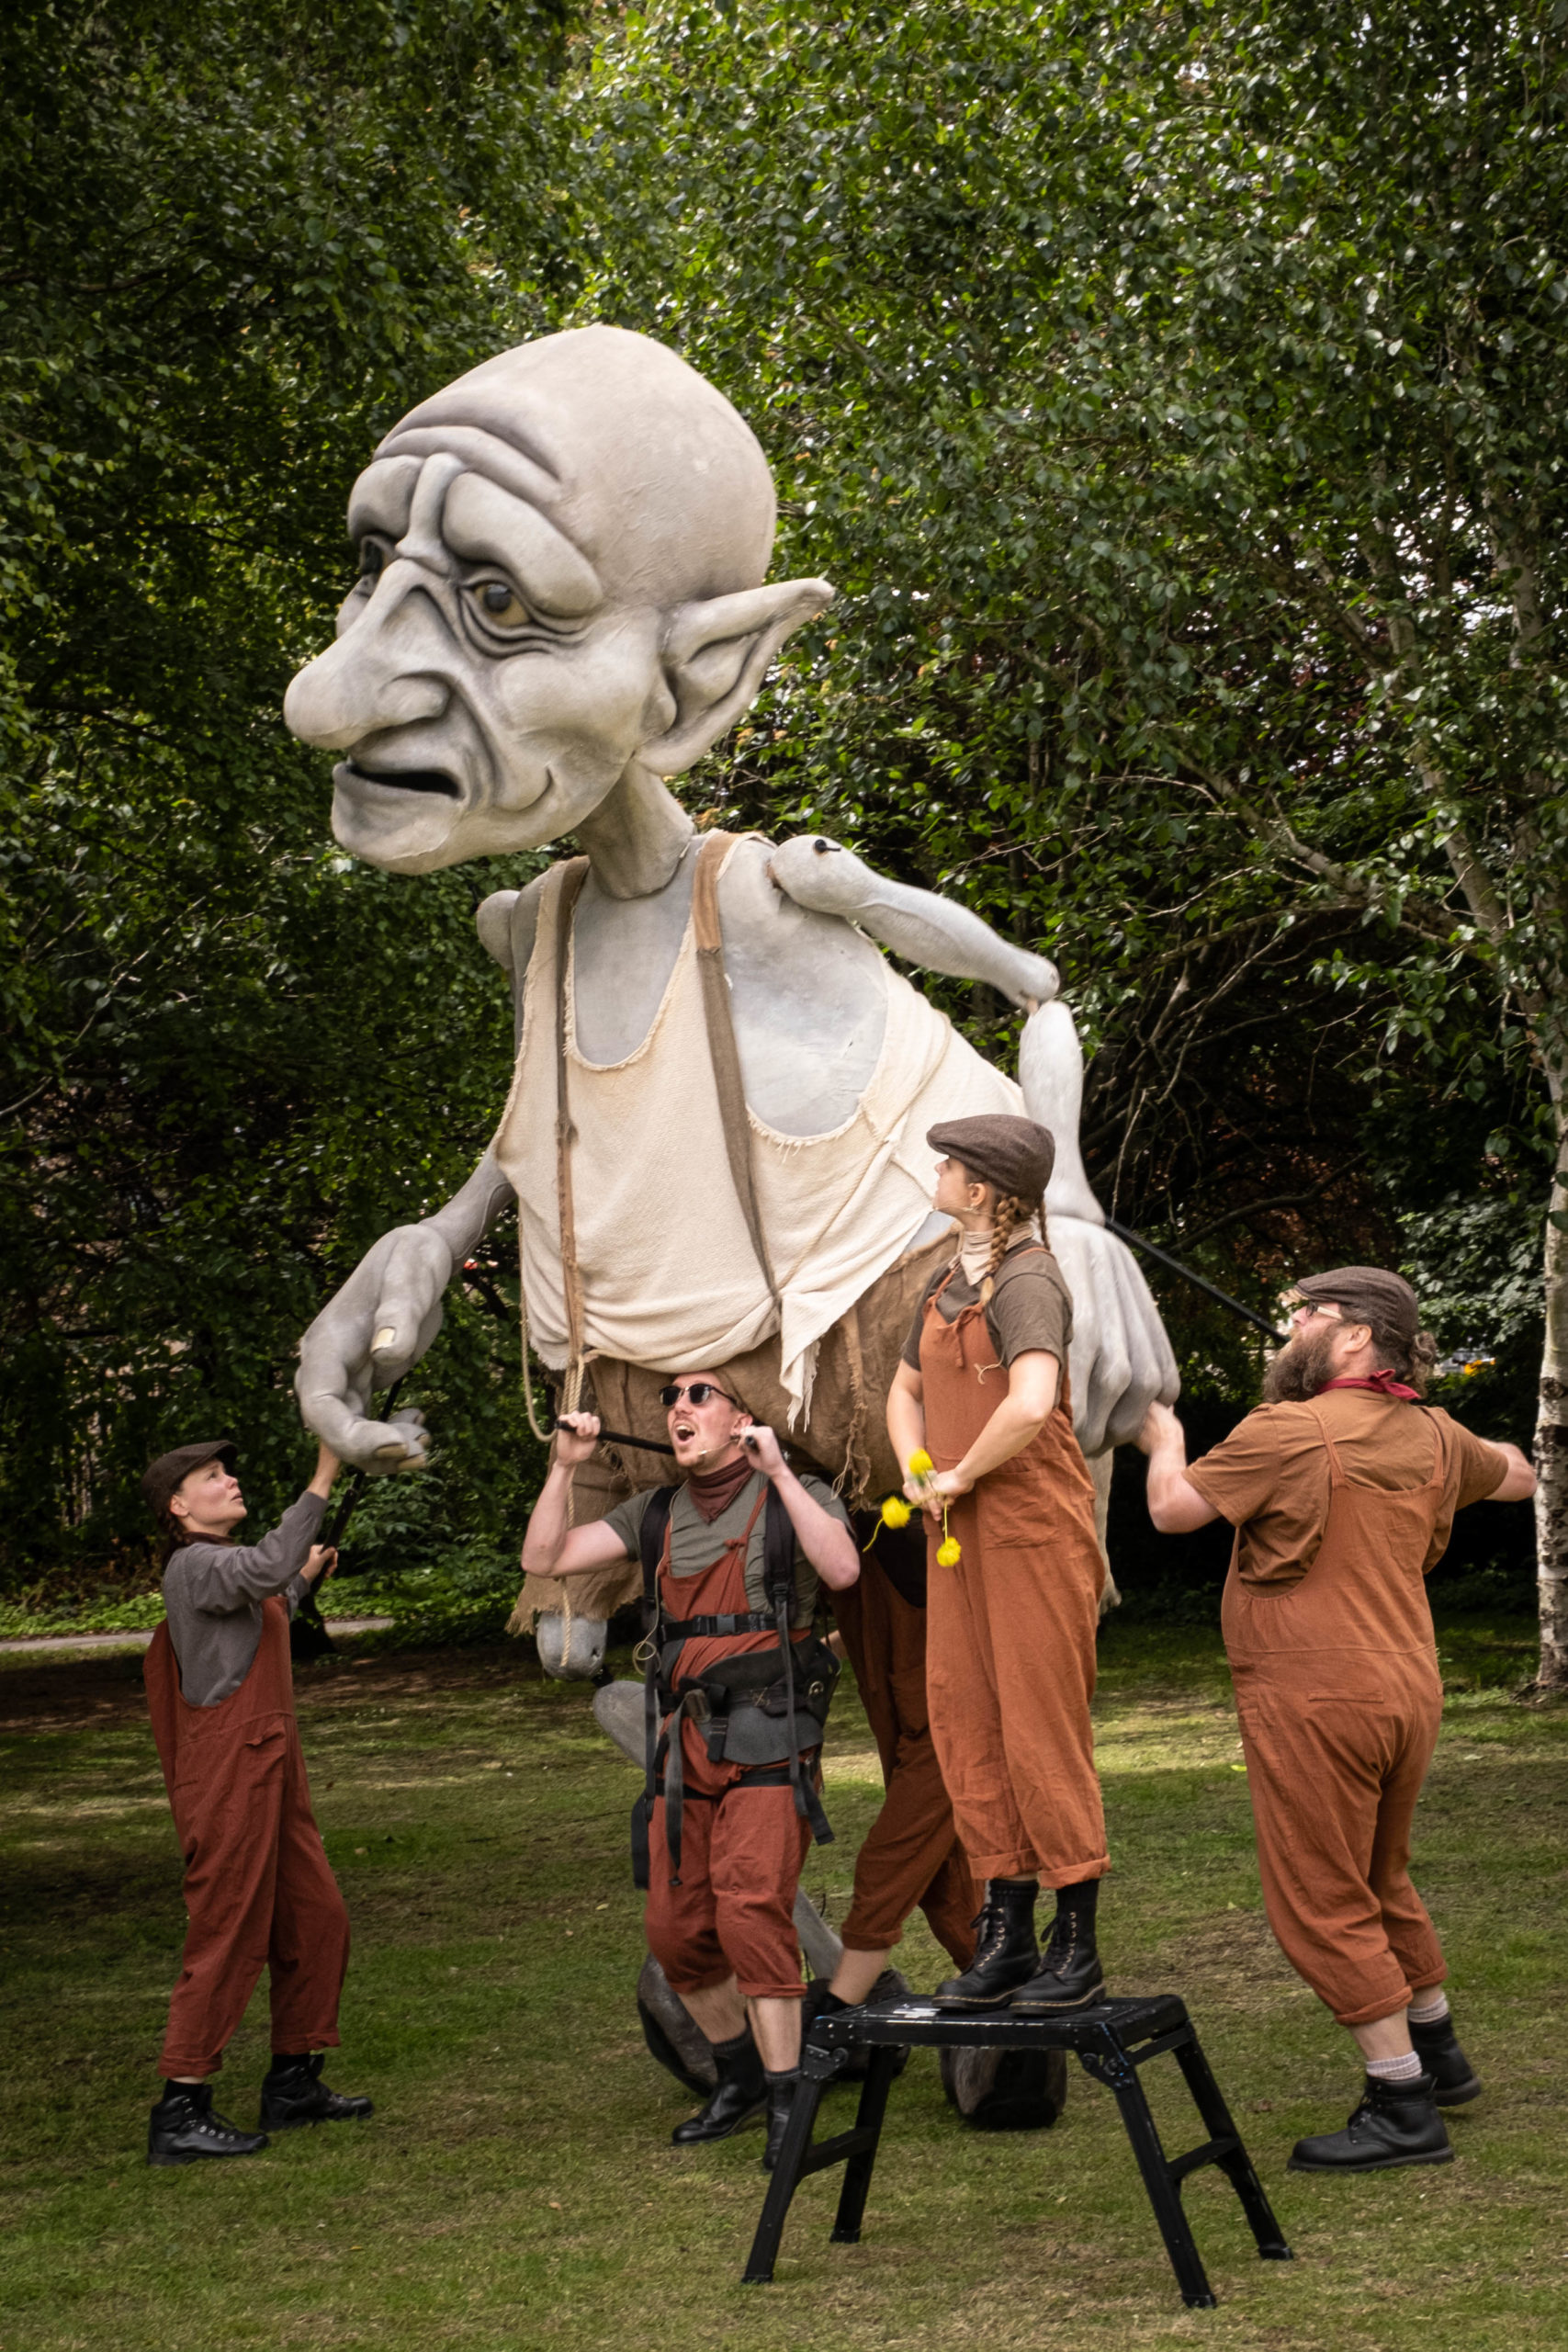 Large giant puppet being moved by four people in a field